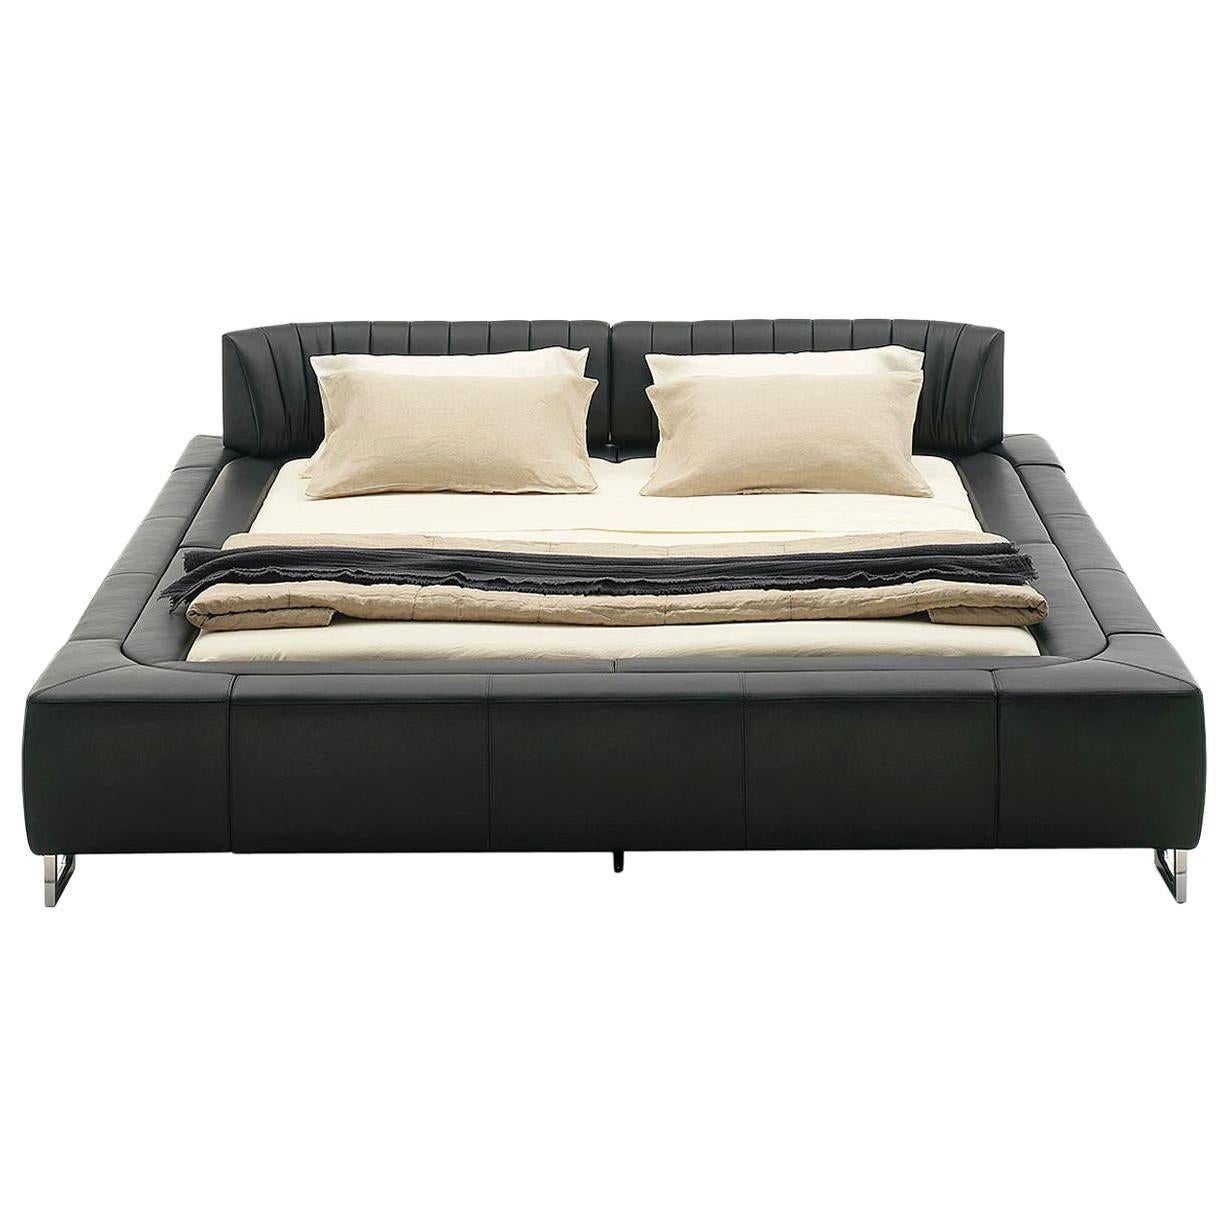 Desede DS-1165 King Size Bed in Leather by Hugo De Ruiter For Sale